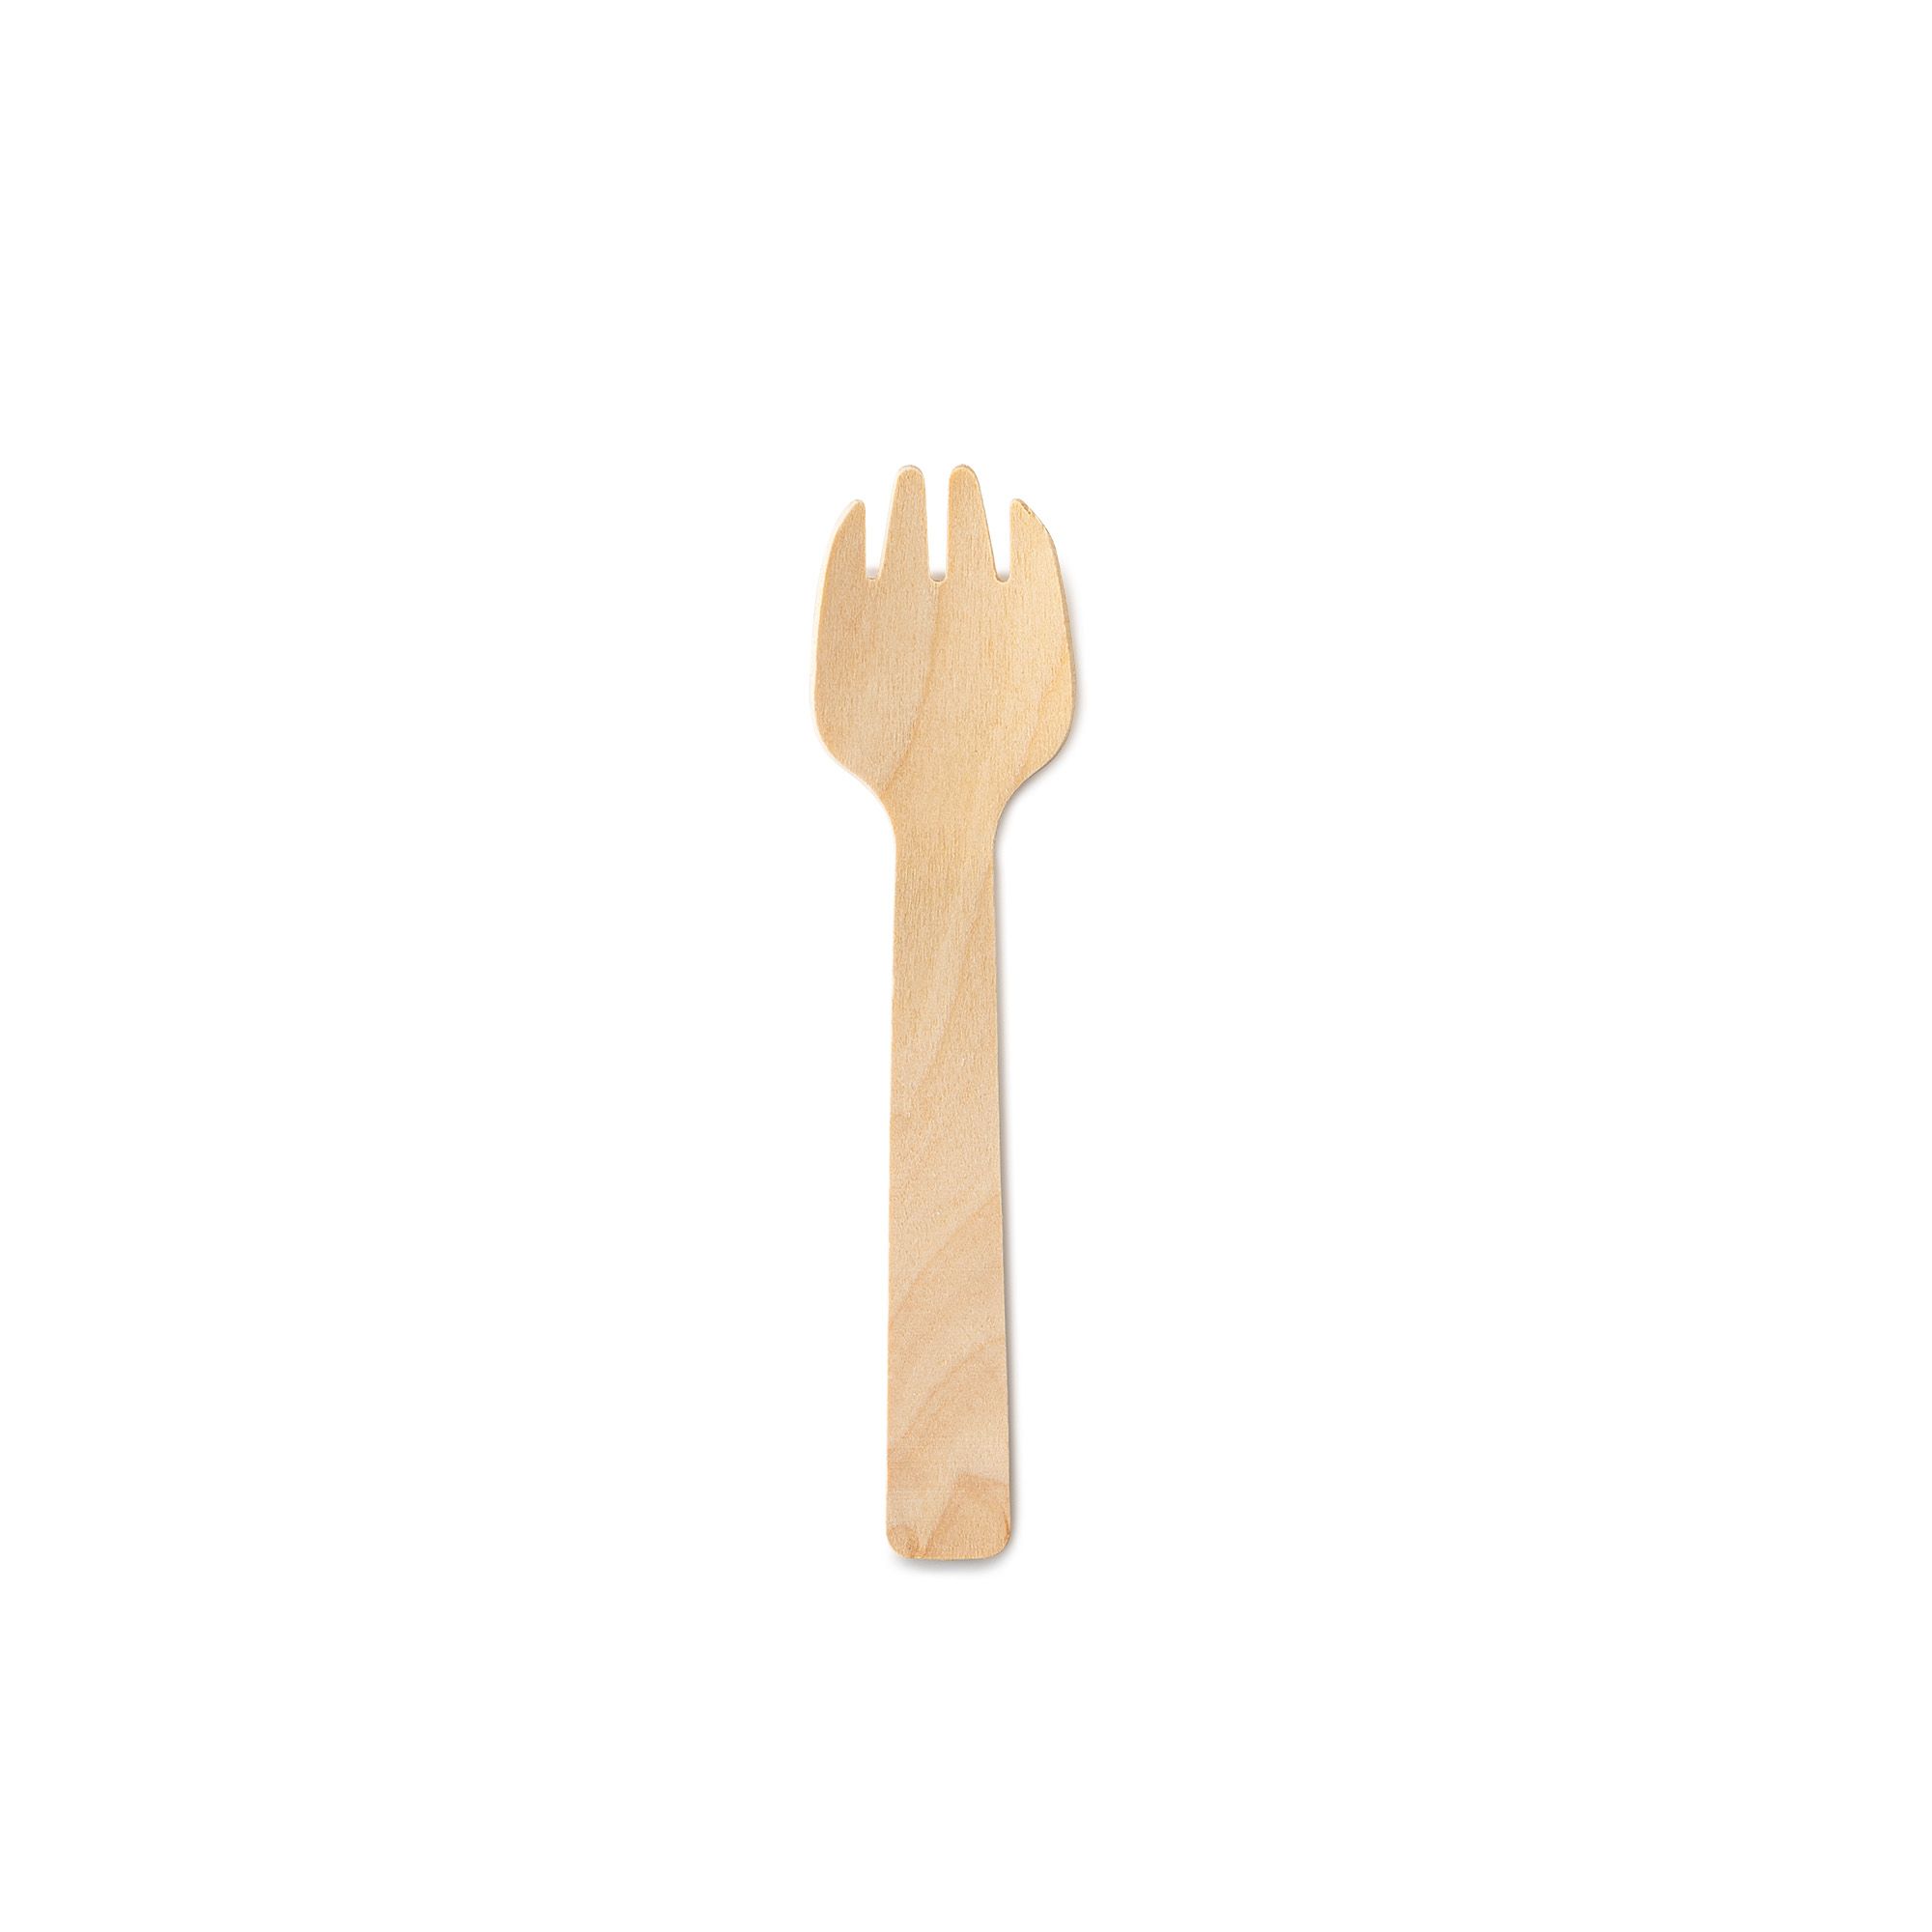 TAIR CHU wooden forks